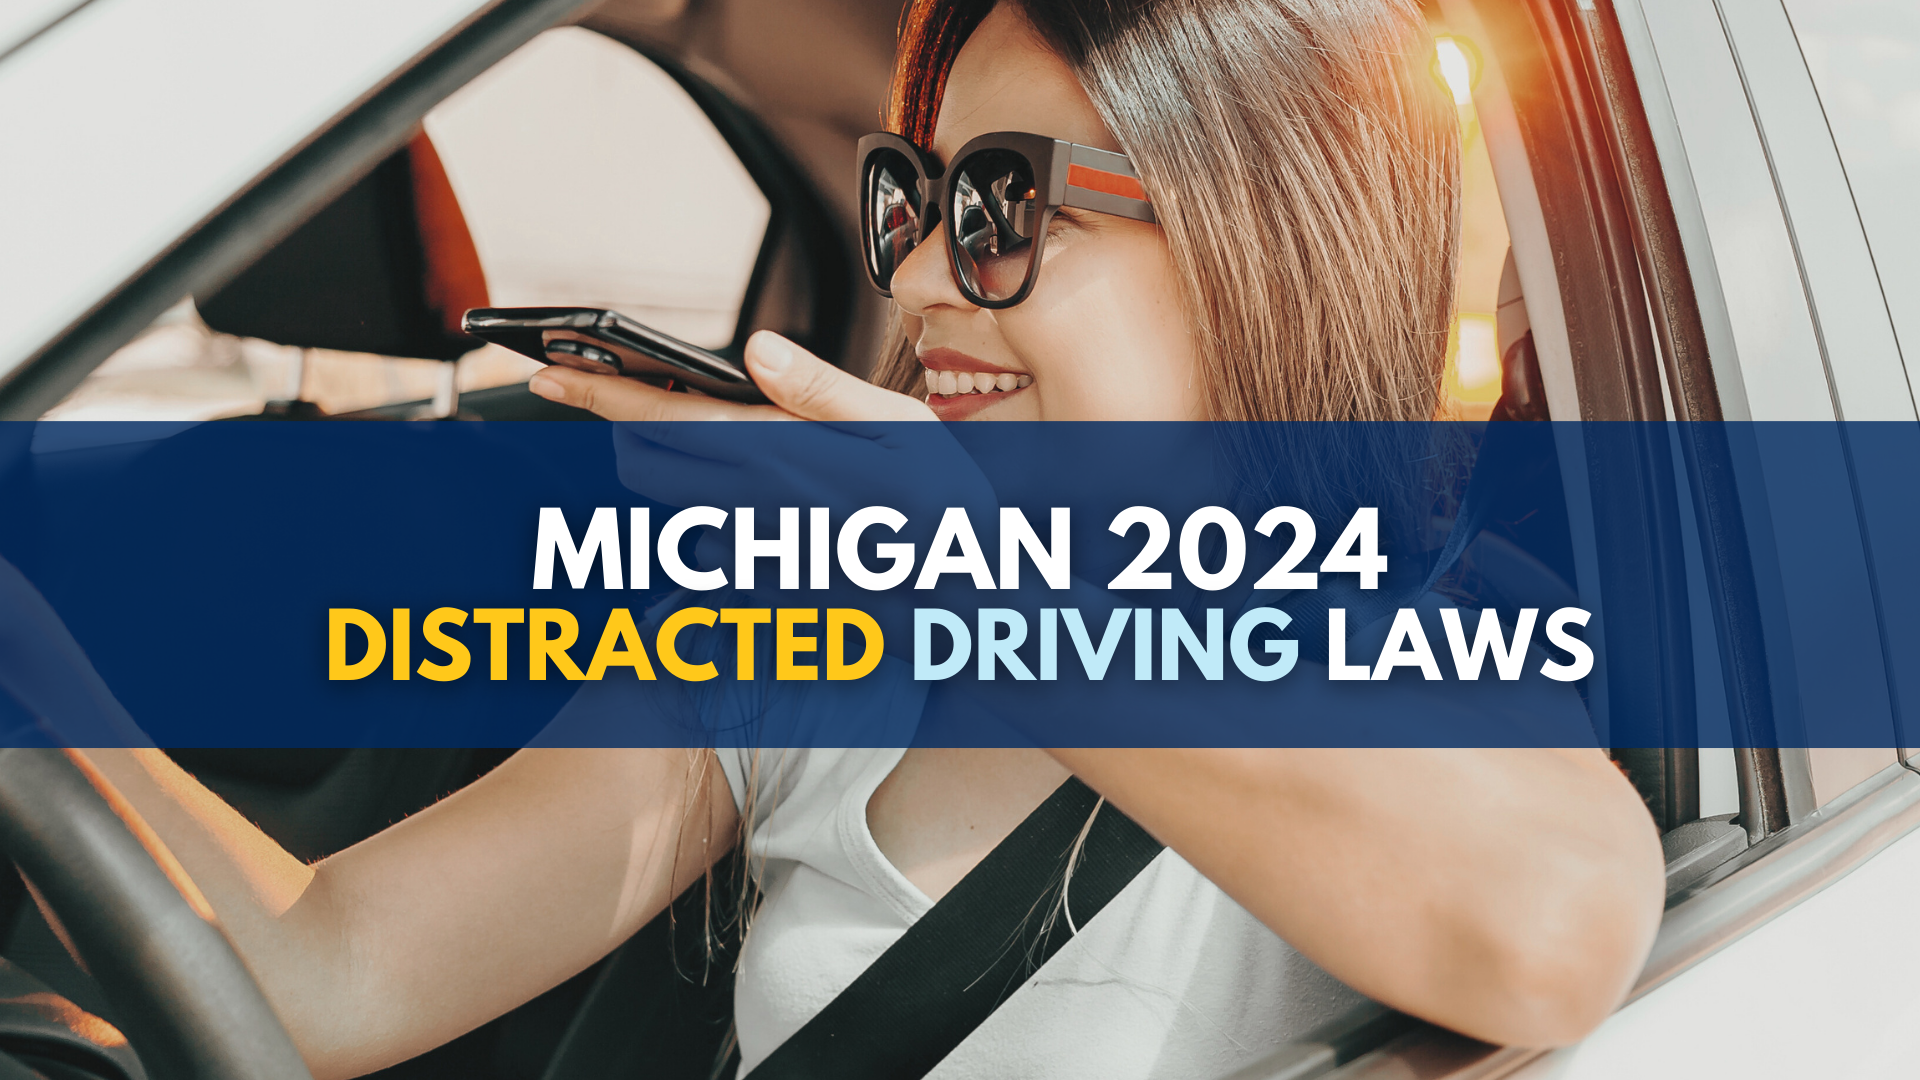 Michigan Distracted Driving Laws: Here's what you need to know in 2024